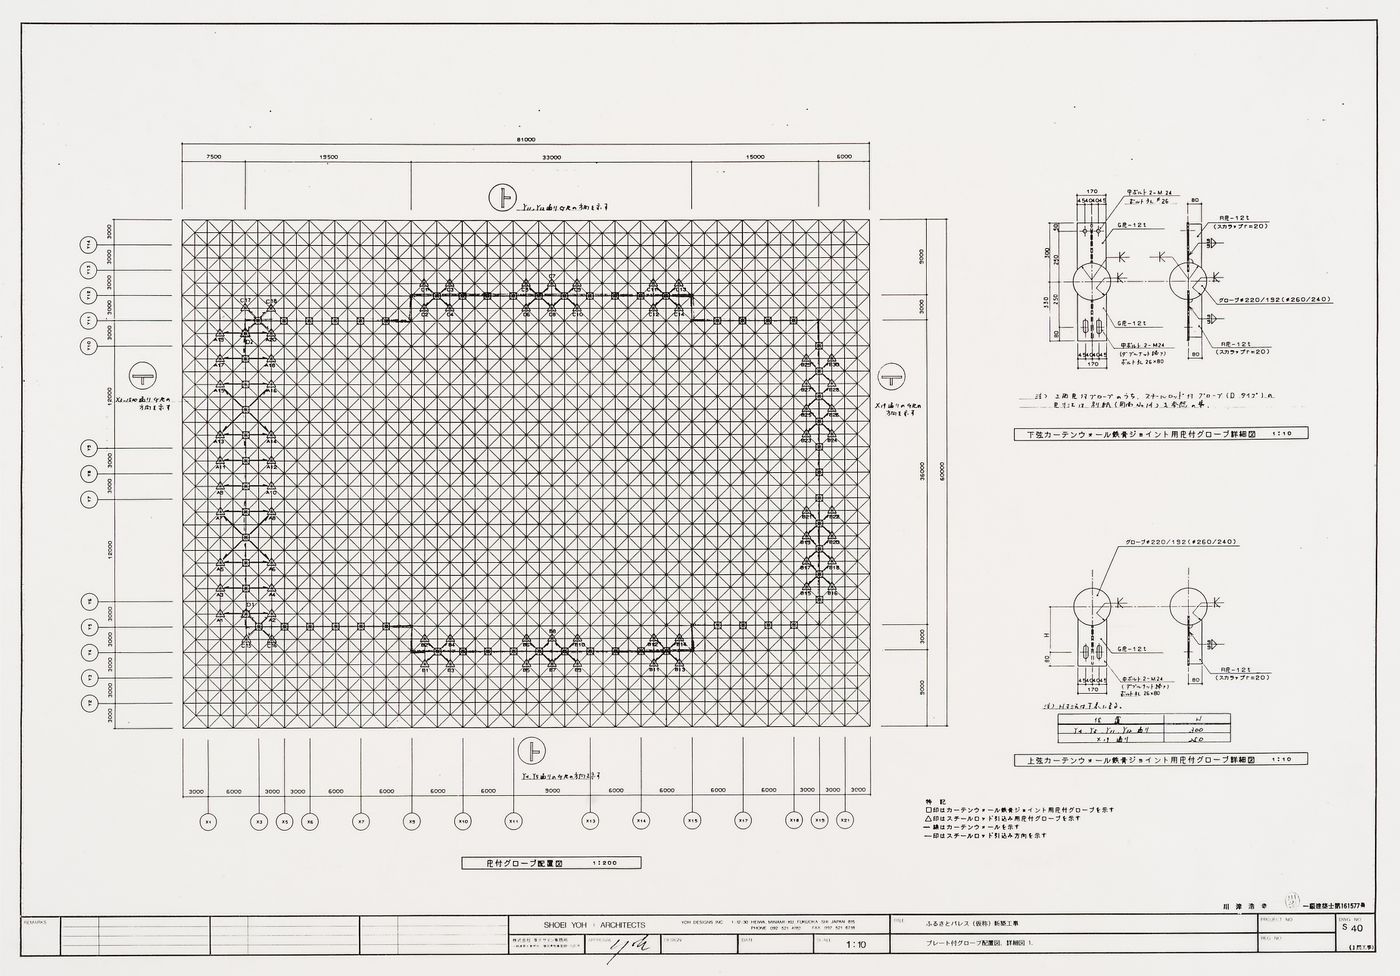 Specifications for the space frame, Galaxy Toyama, Gymnasium, Imizu, Japan